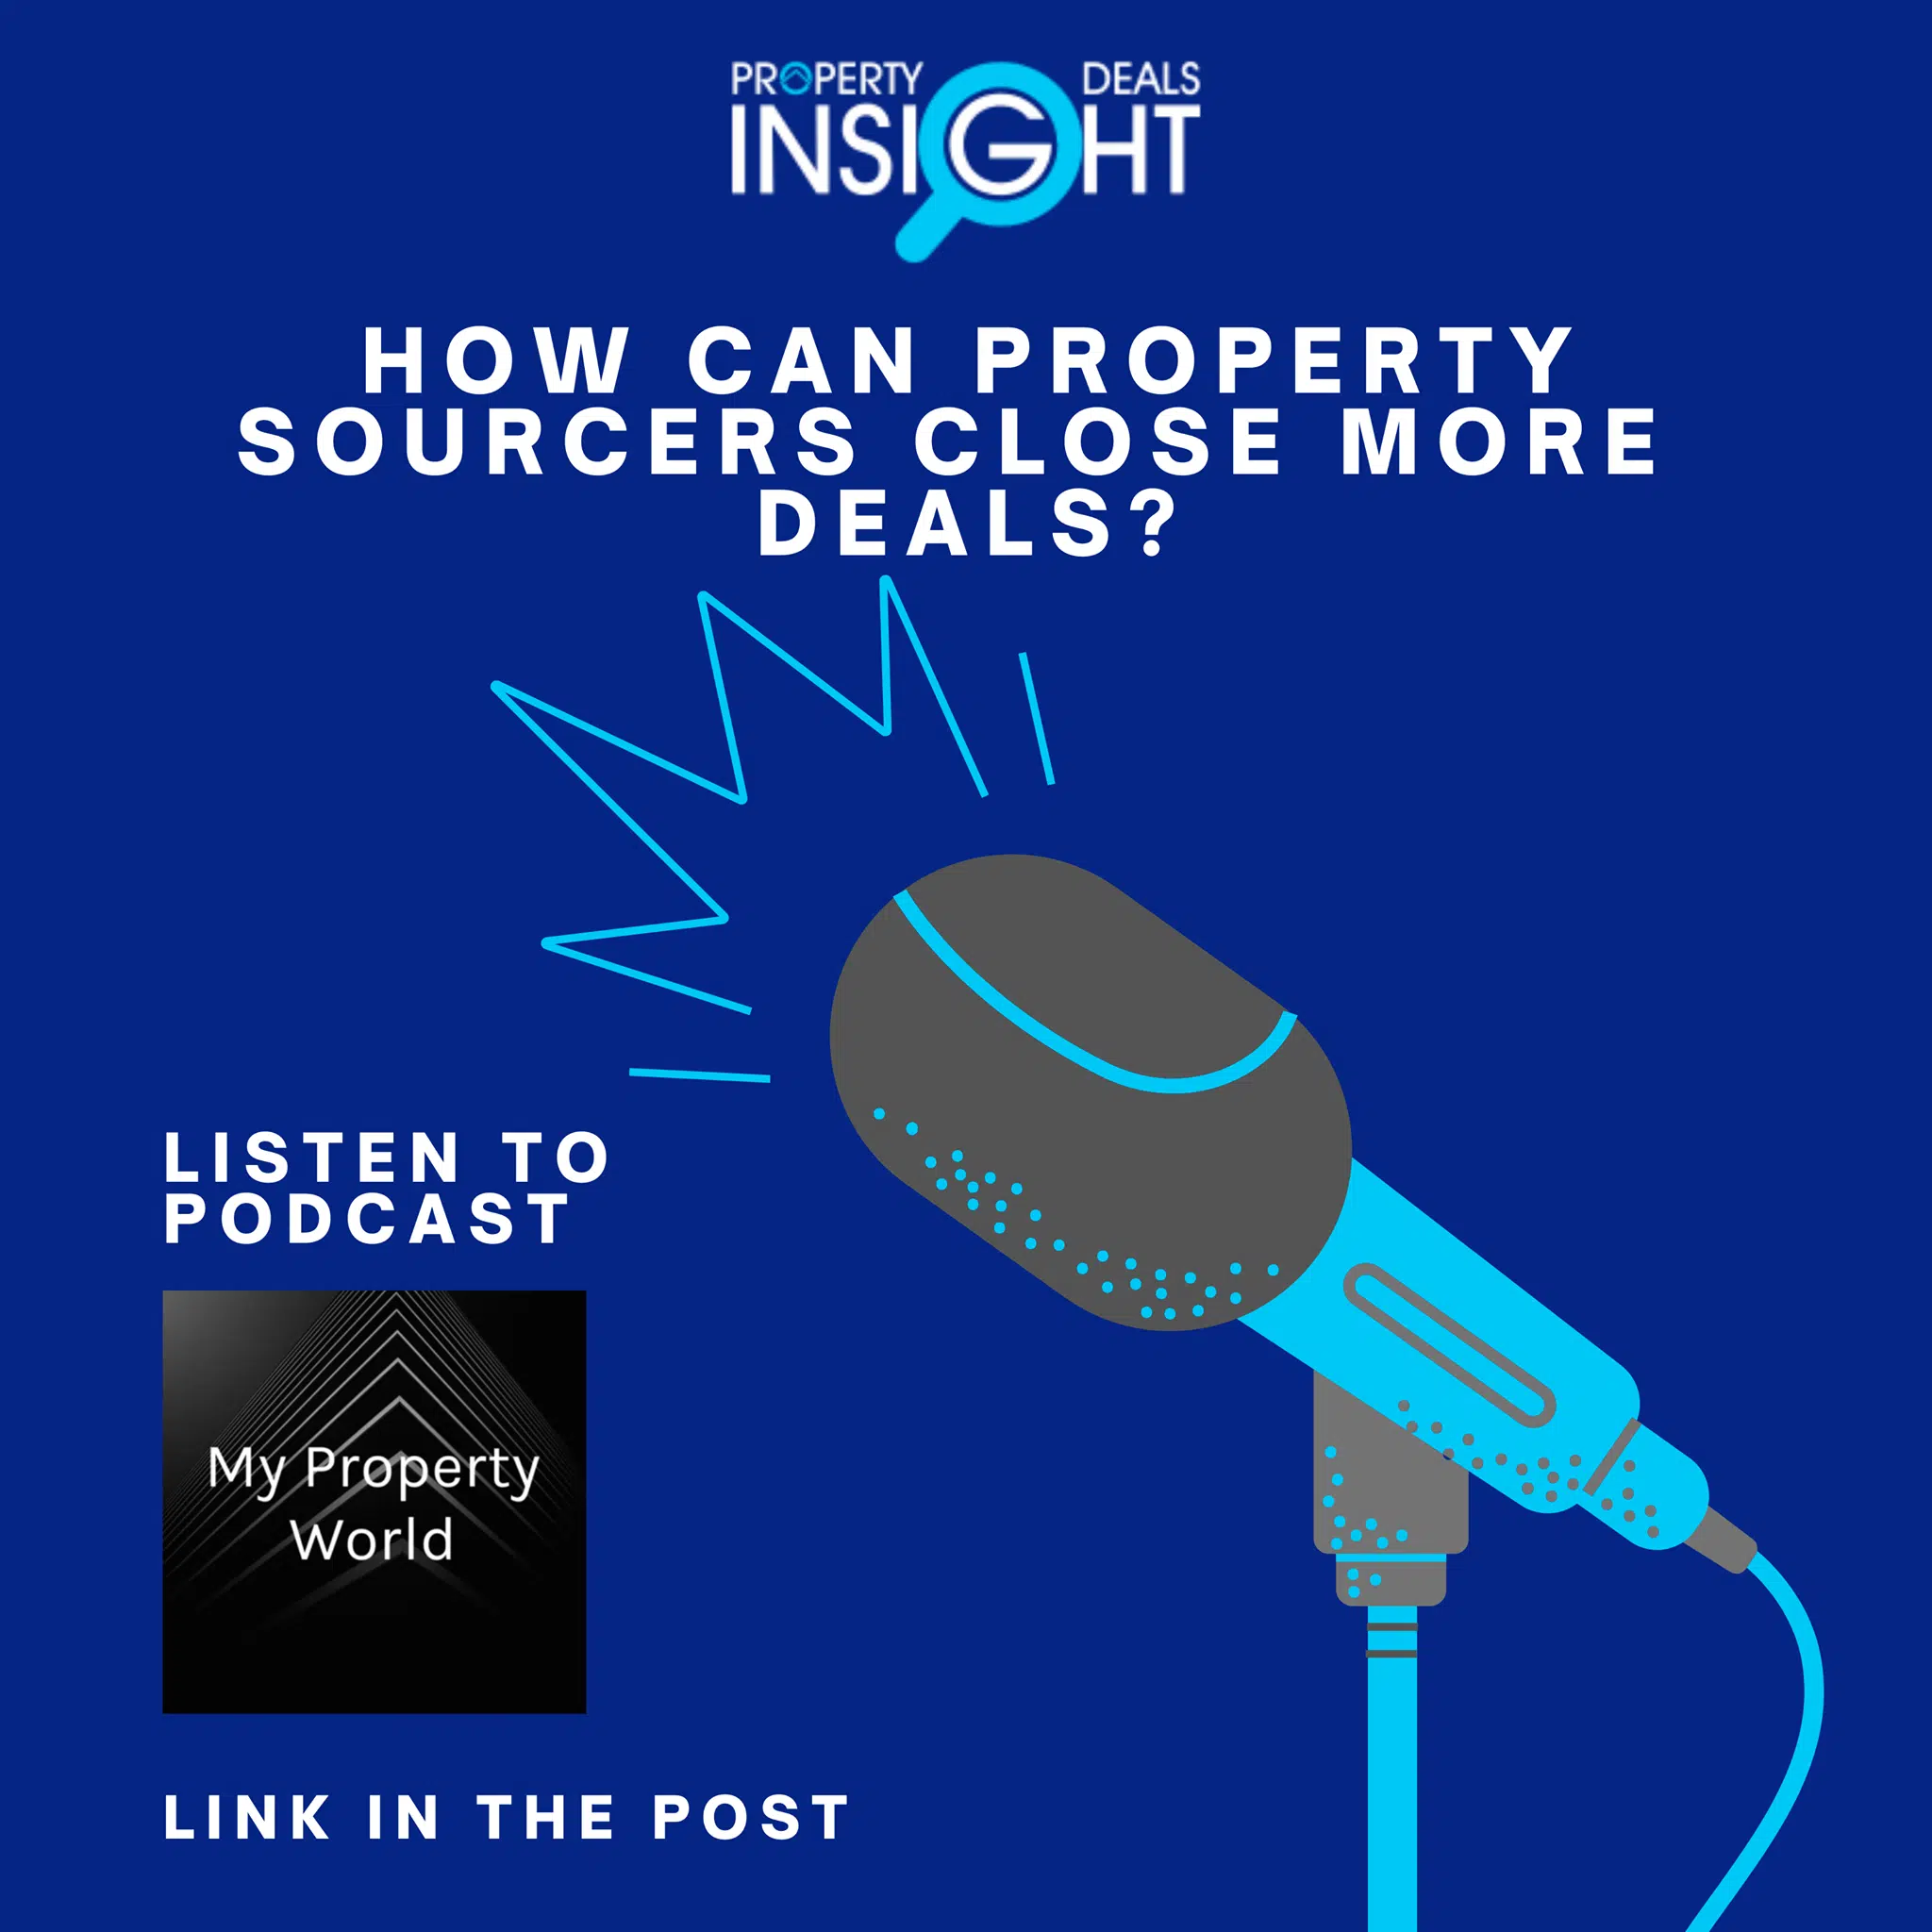 Property Deals Insight - How Property Sourcers Can Close More Deals Fast